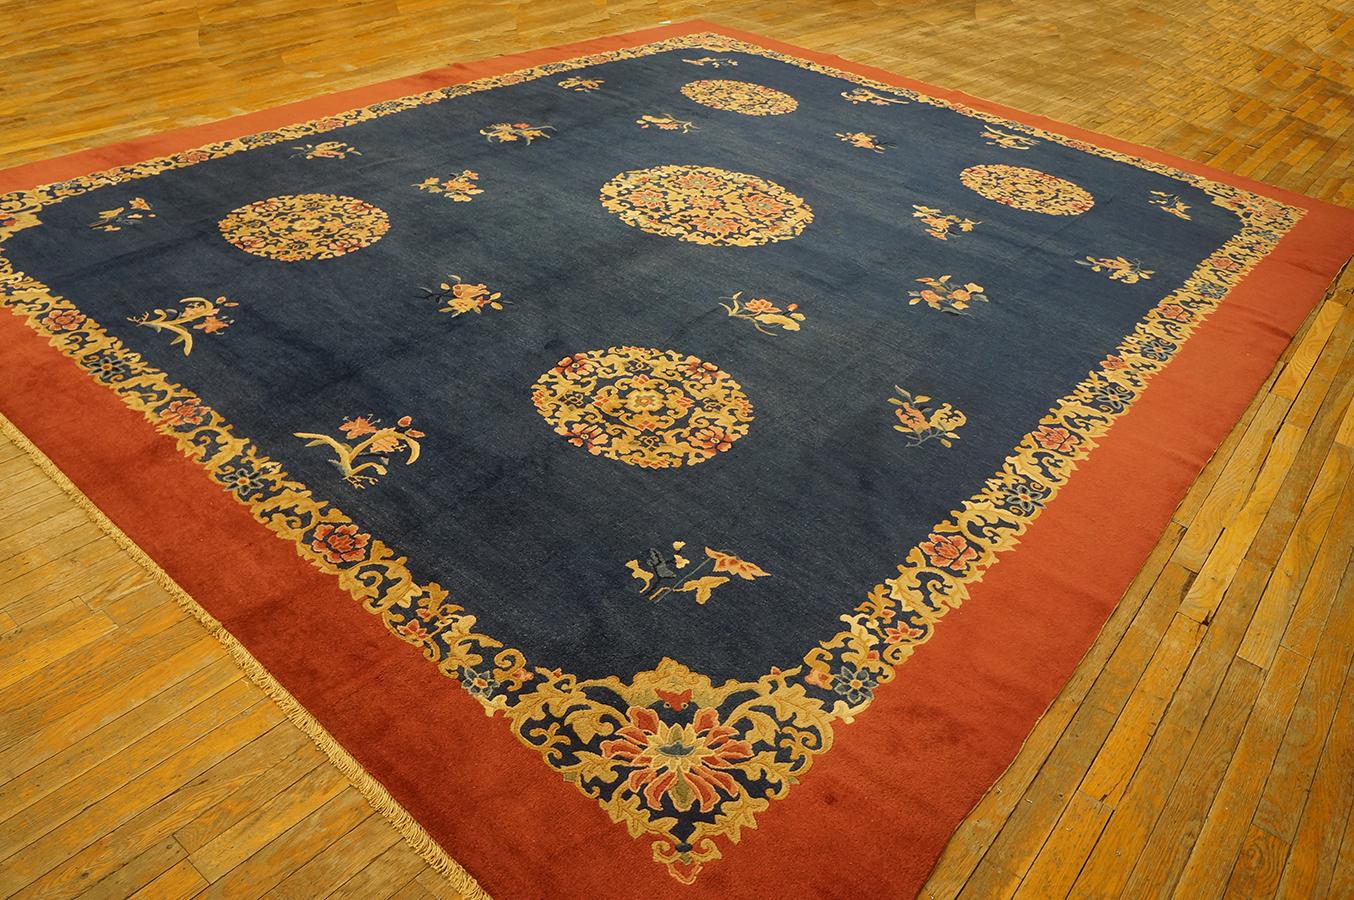 Hand-Knotted Early 20th Century Chinese Peking Carpet ( 11' x 13'6'' - 335 x 412 ) For Sale